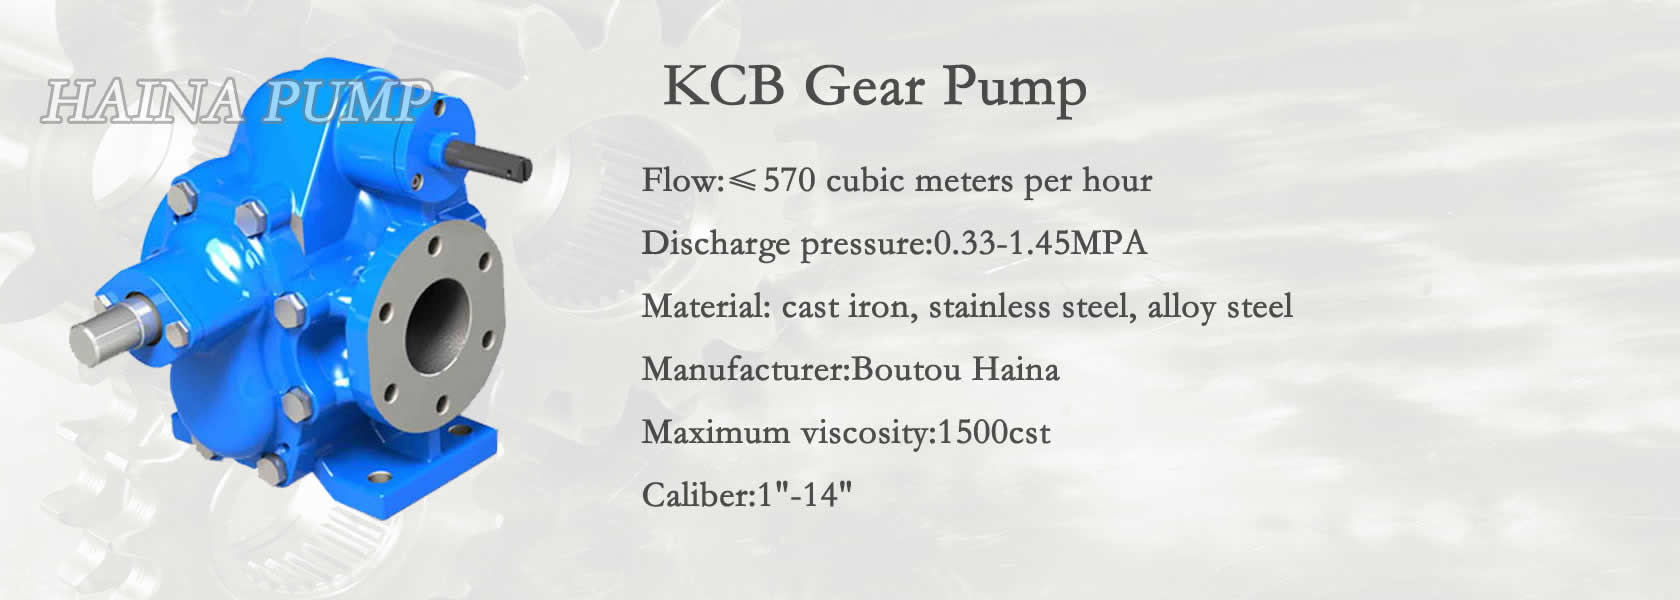 KCB Gear Pum Made In China